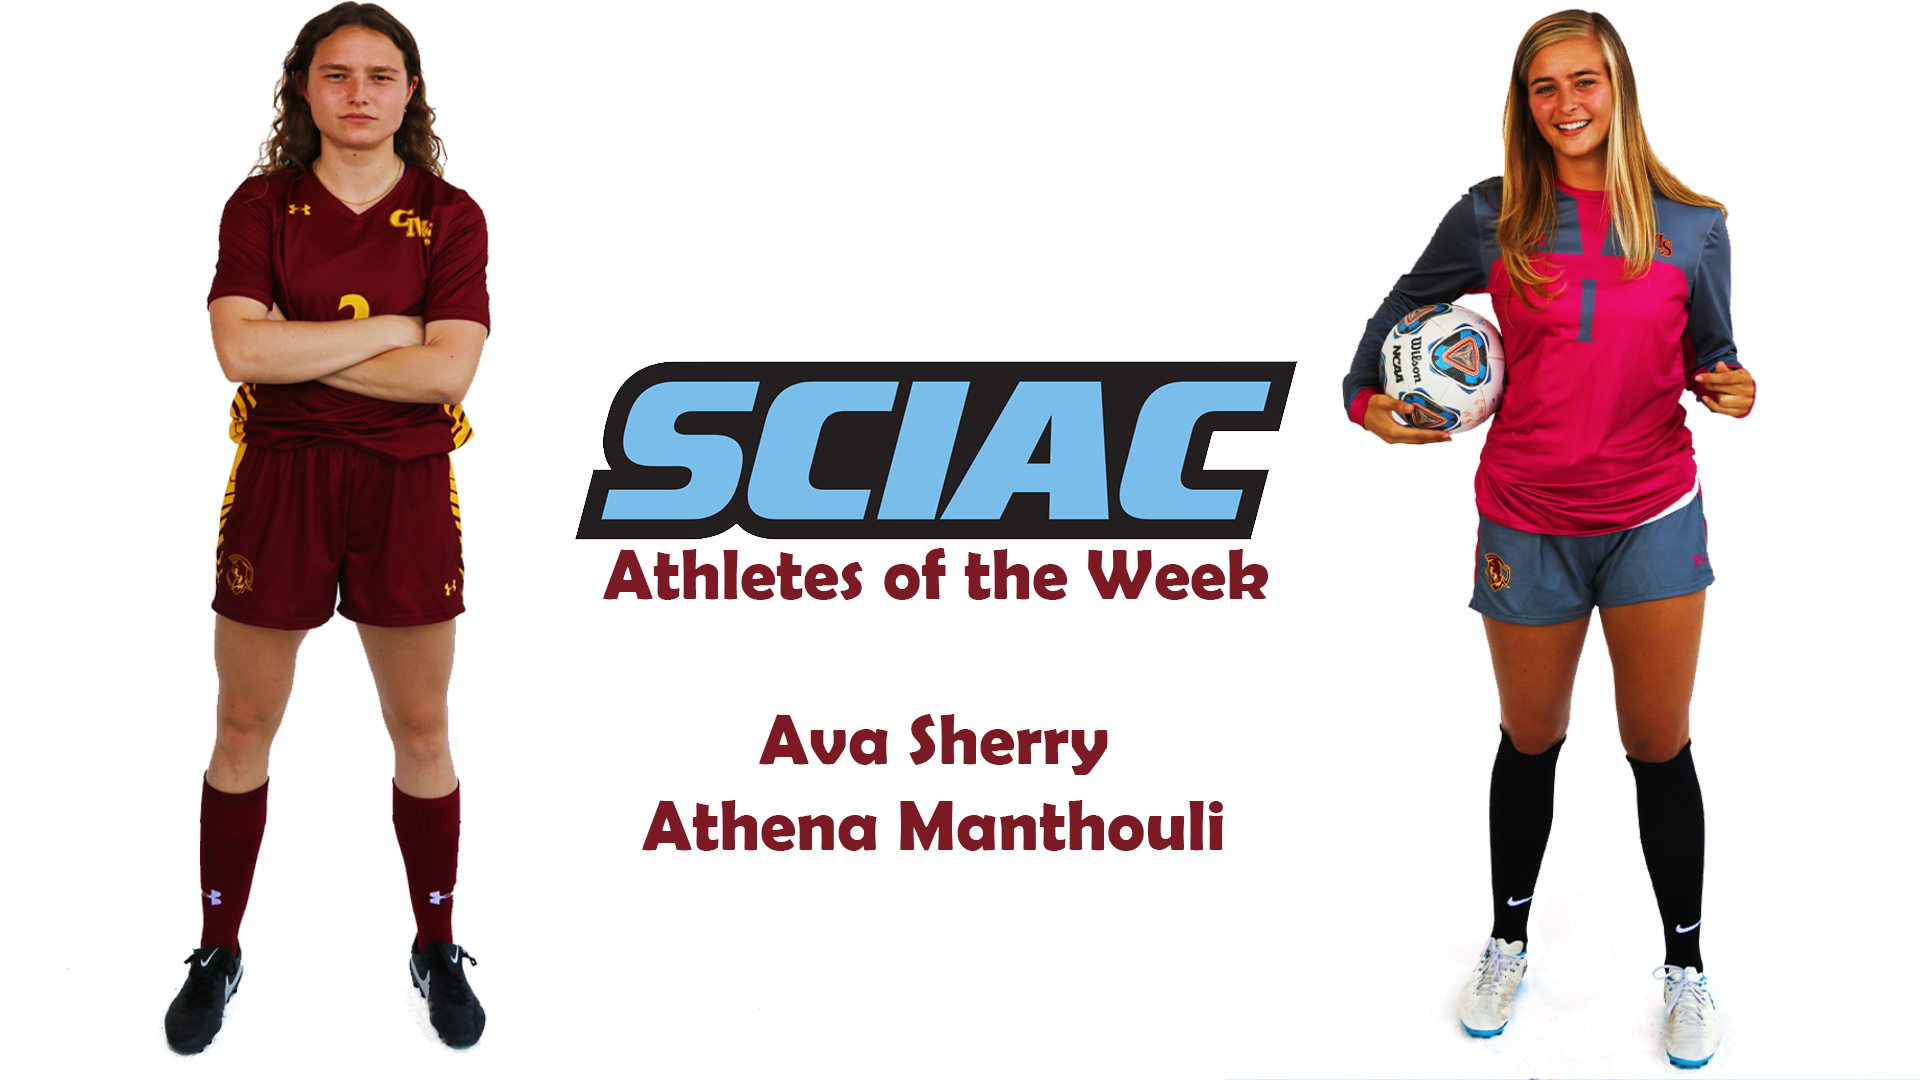 Ava Sherry and Athena Manthouli posed shots with the SCIAC logo